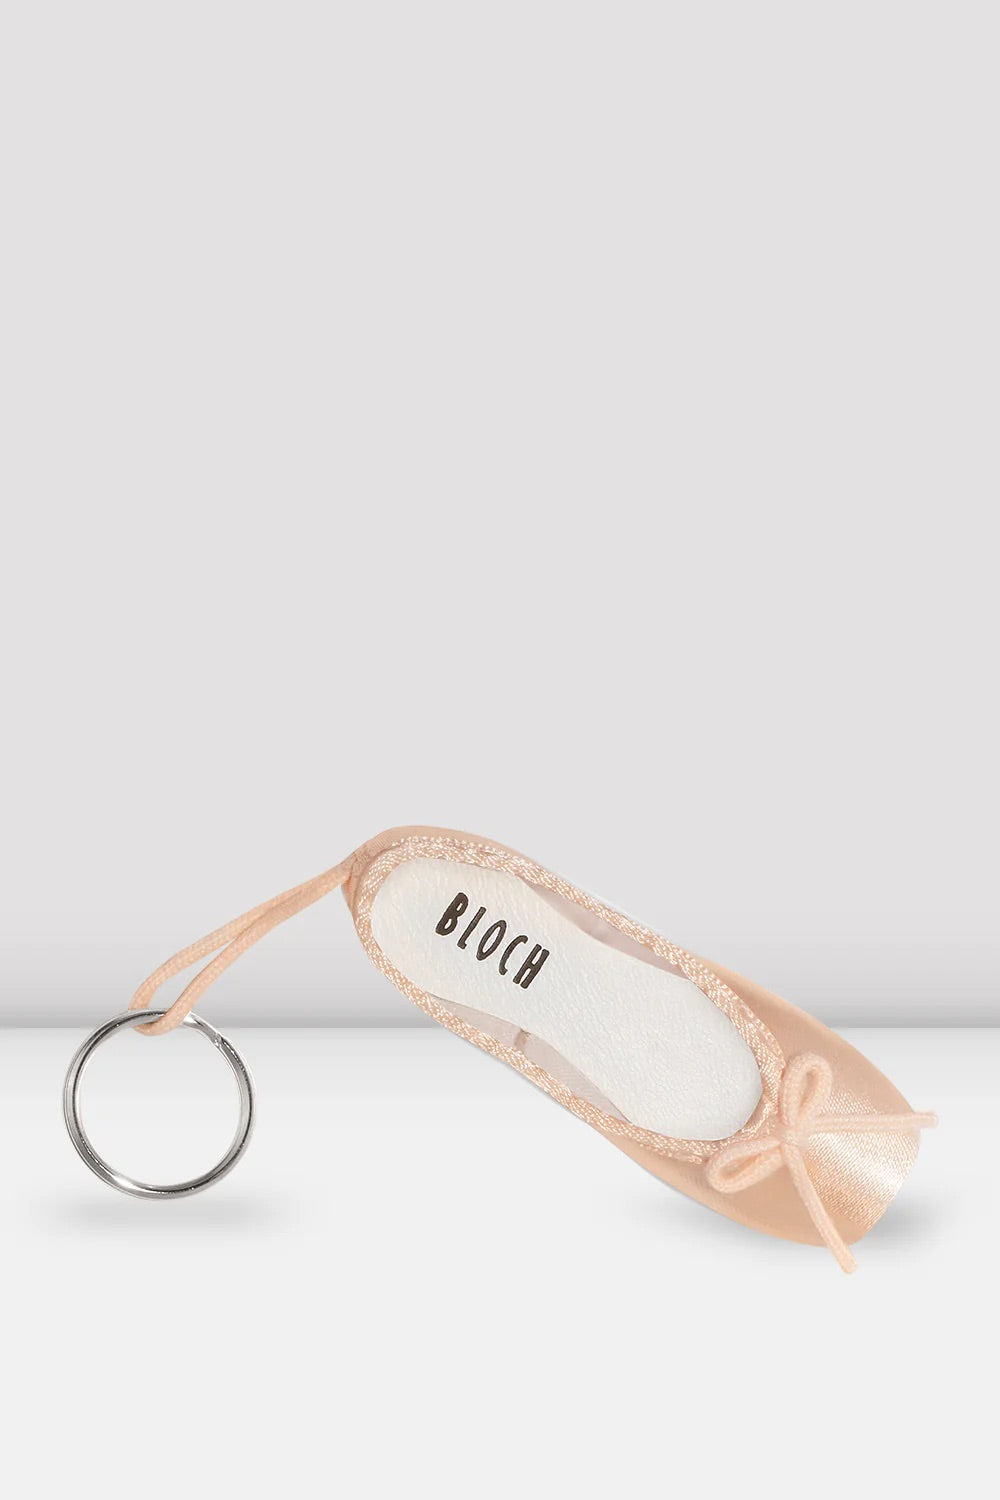 Bloch key ring mini pointe shoe in Pink from The Collective Dancewear